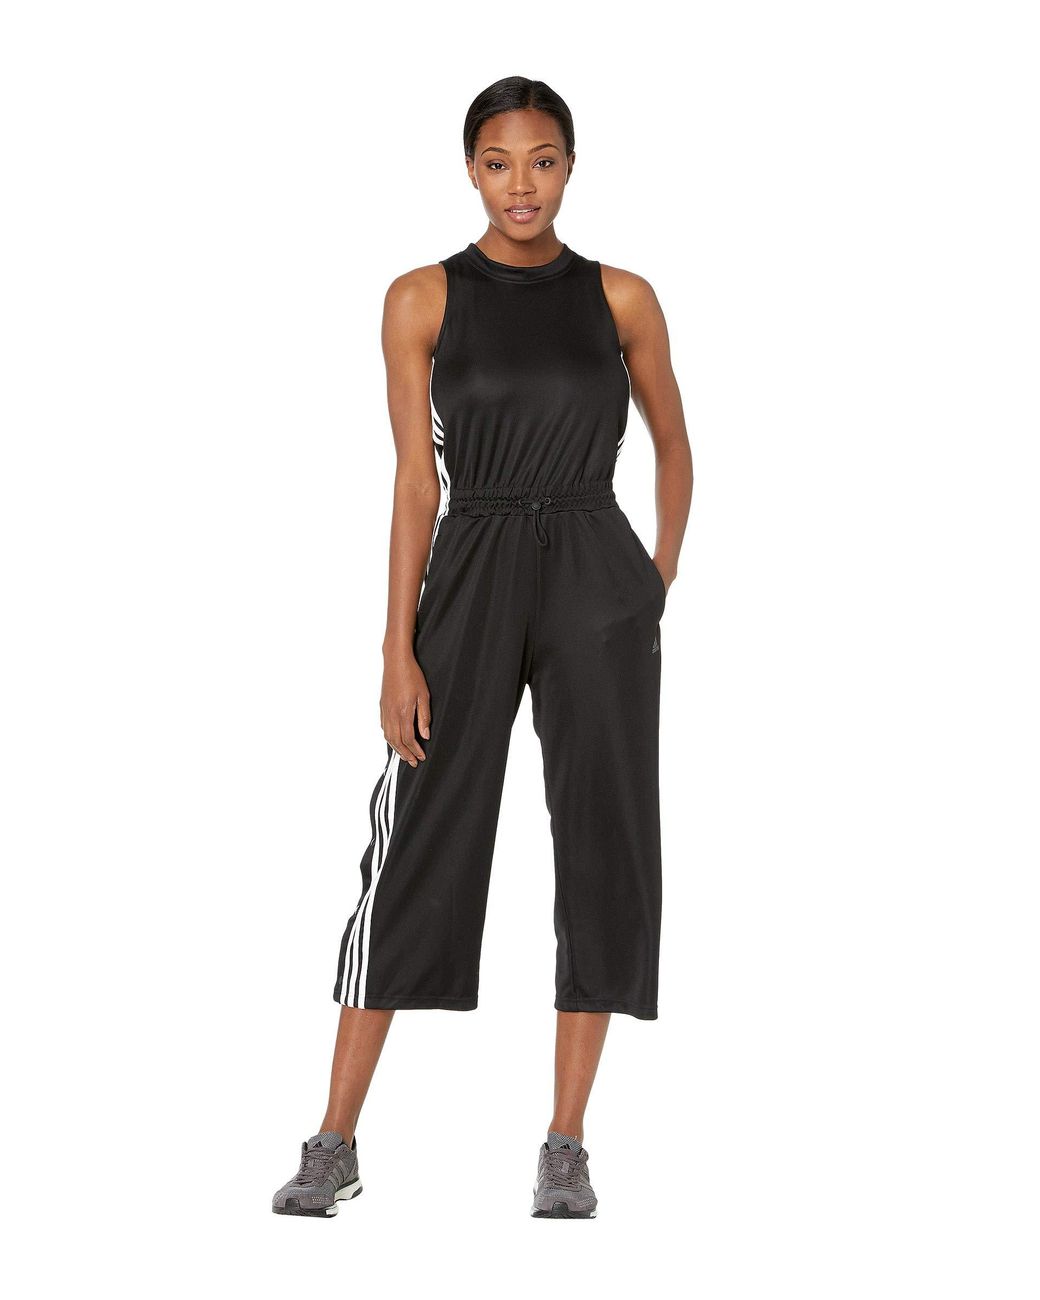 adidas Snap Romper (black/white) Women's Jumpsuit & Rompers One Piece | Lyst